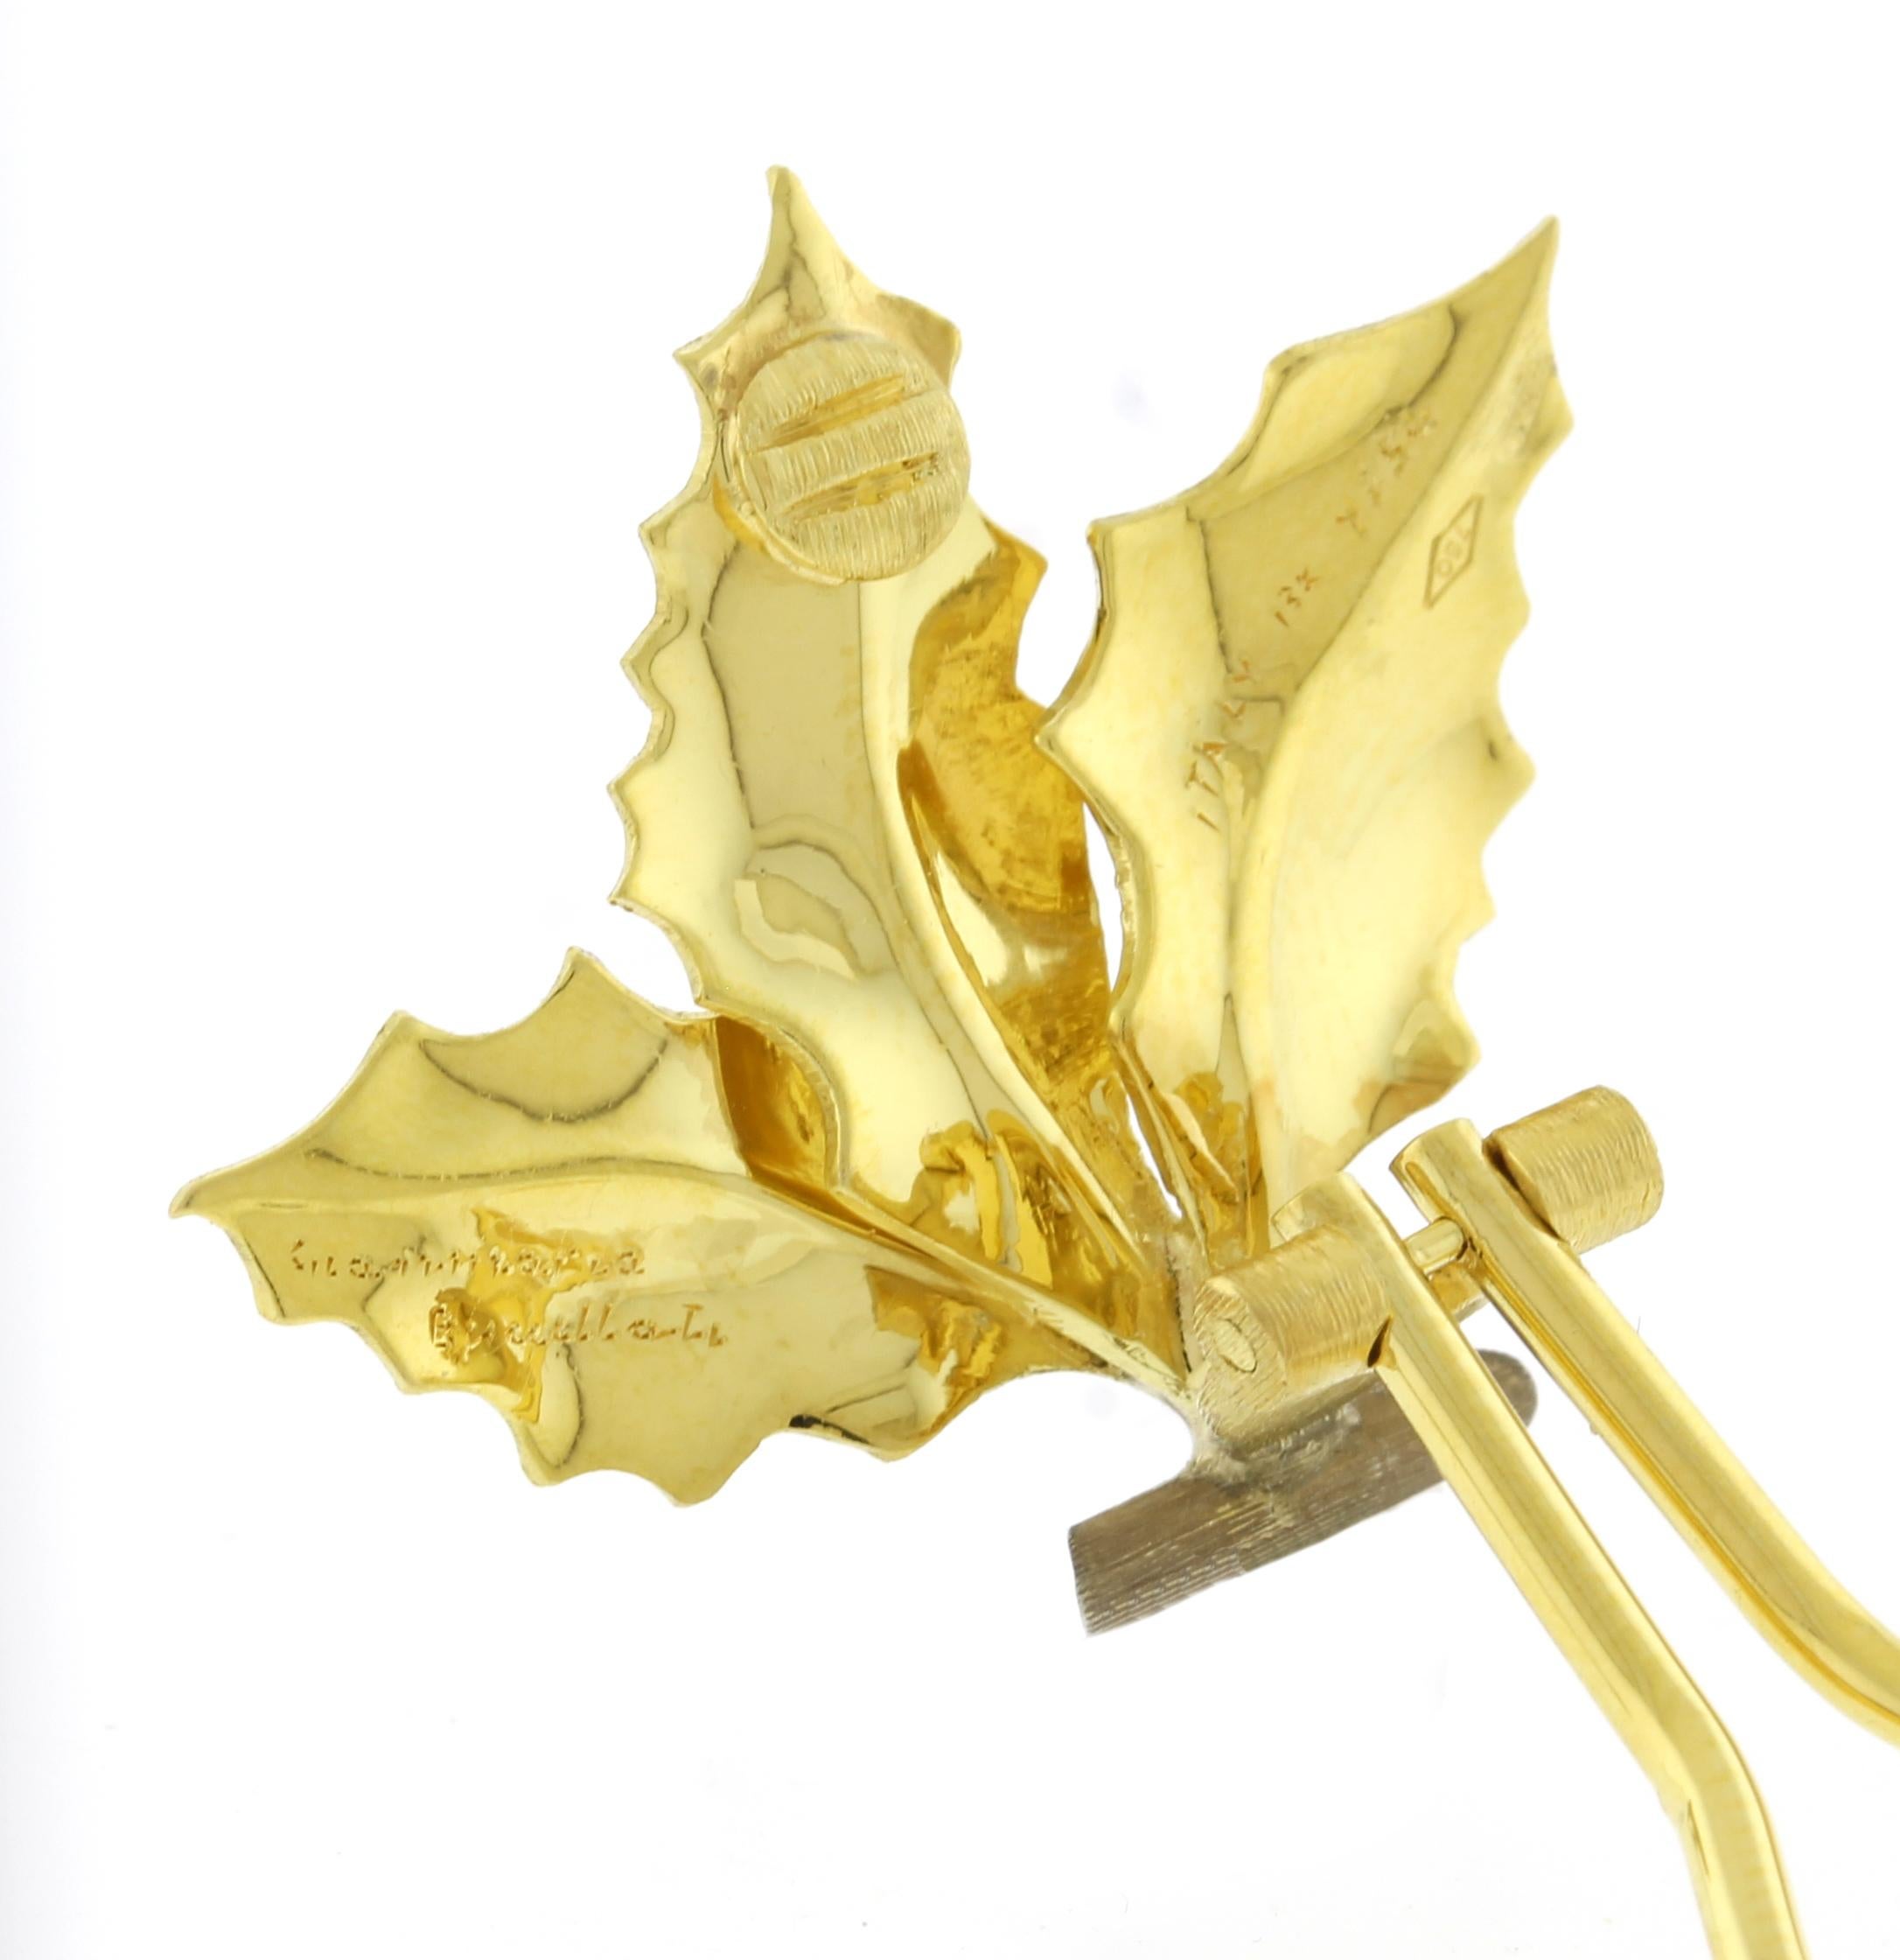 Buccellati Foglia Cardo Gold Leaf Earrings In Excellent Condition For Sale In Bethesda, MD